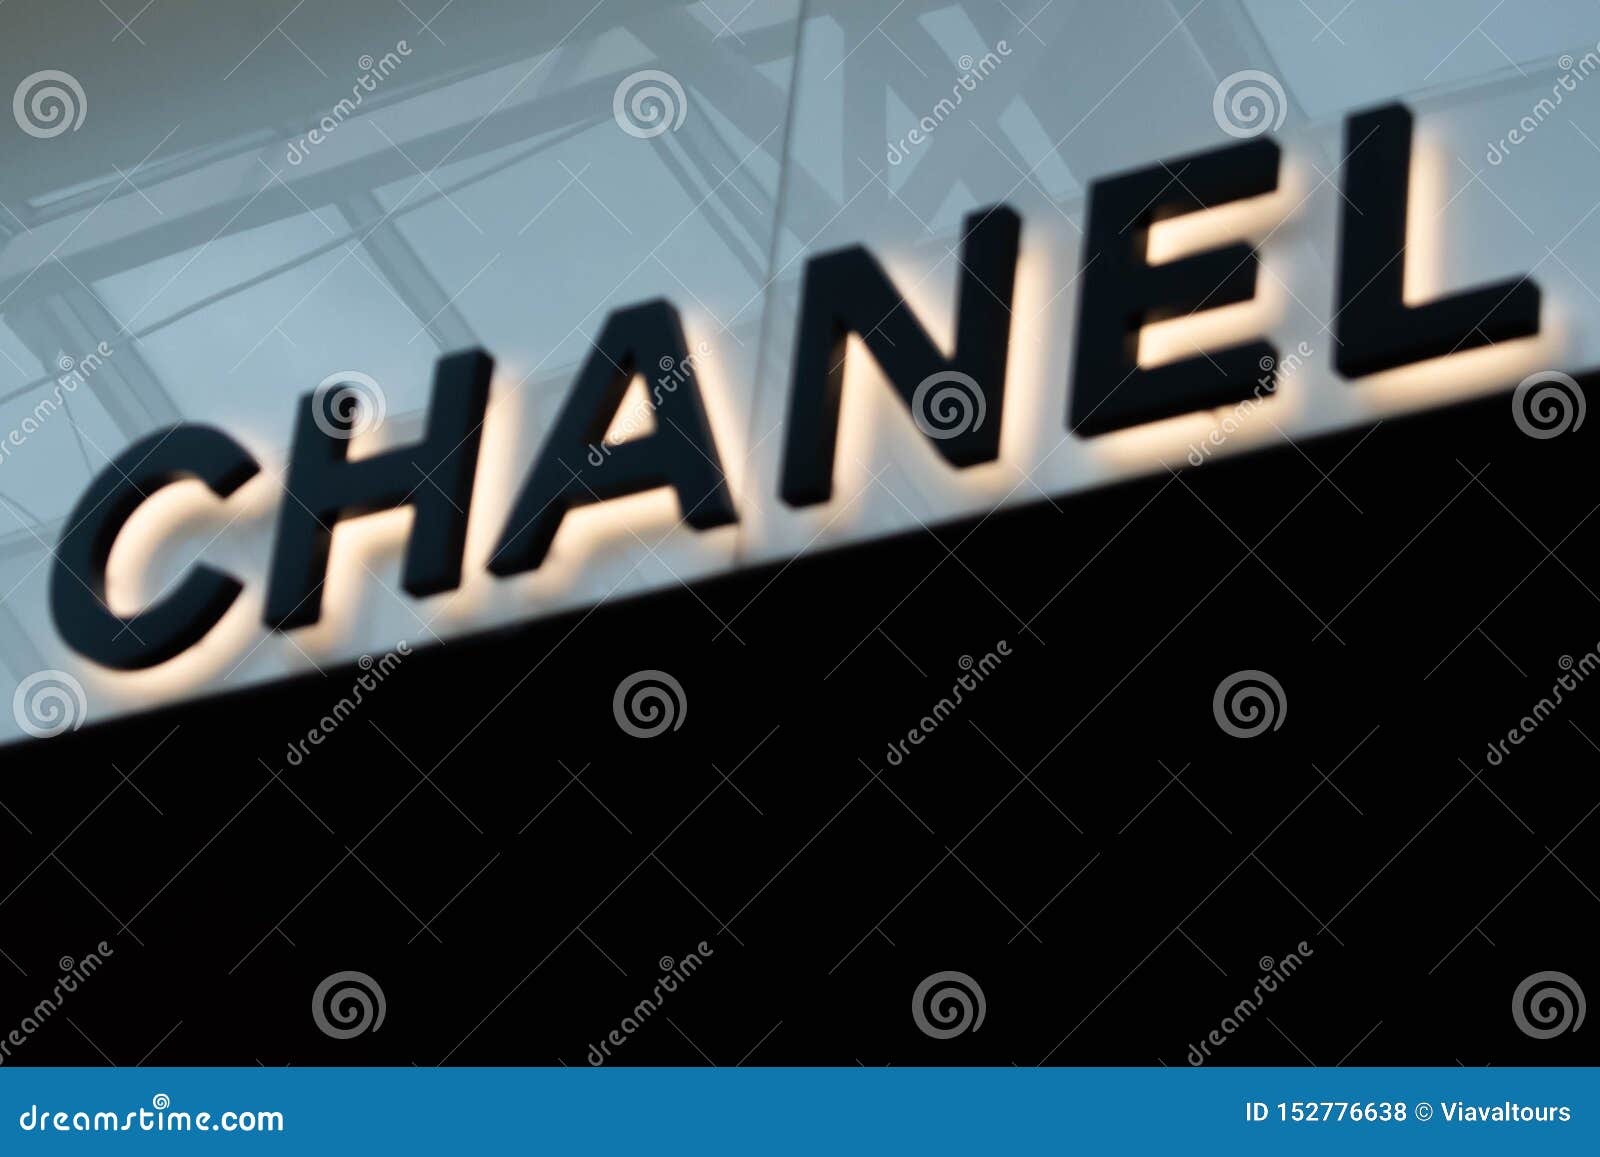 chanel stores